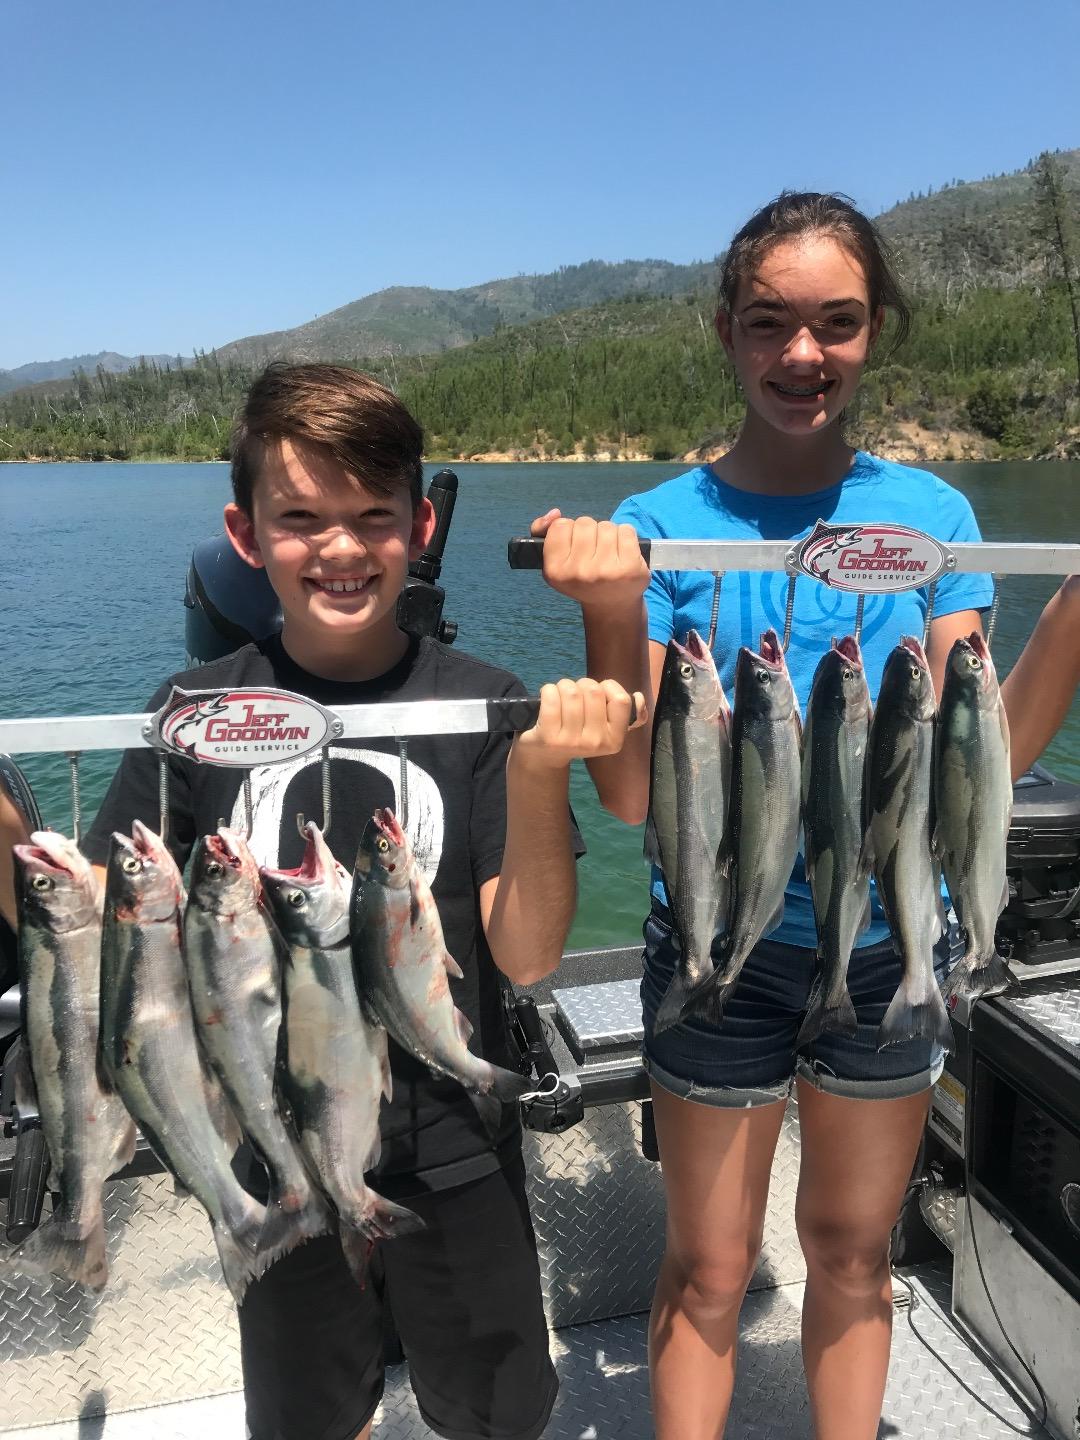 Kids day on Whiskeytown